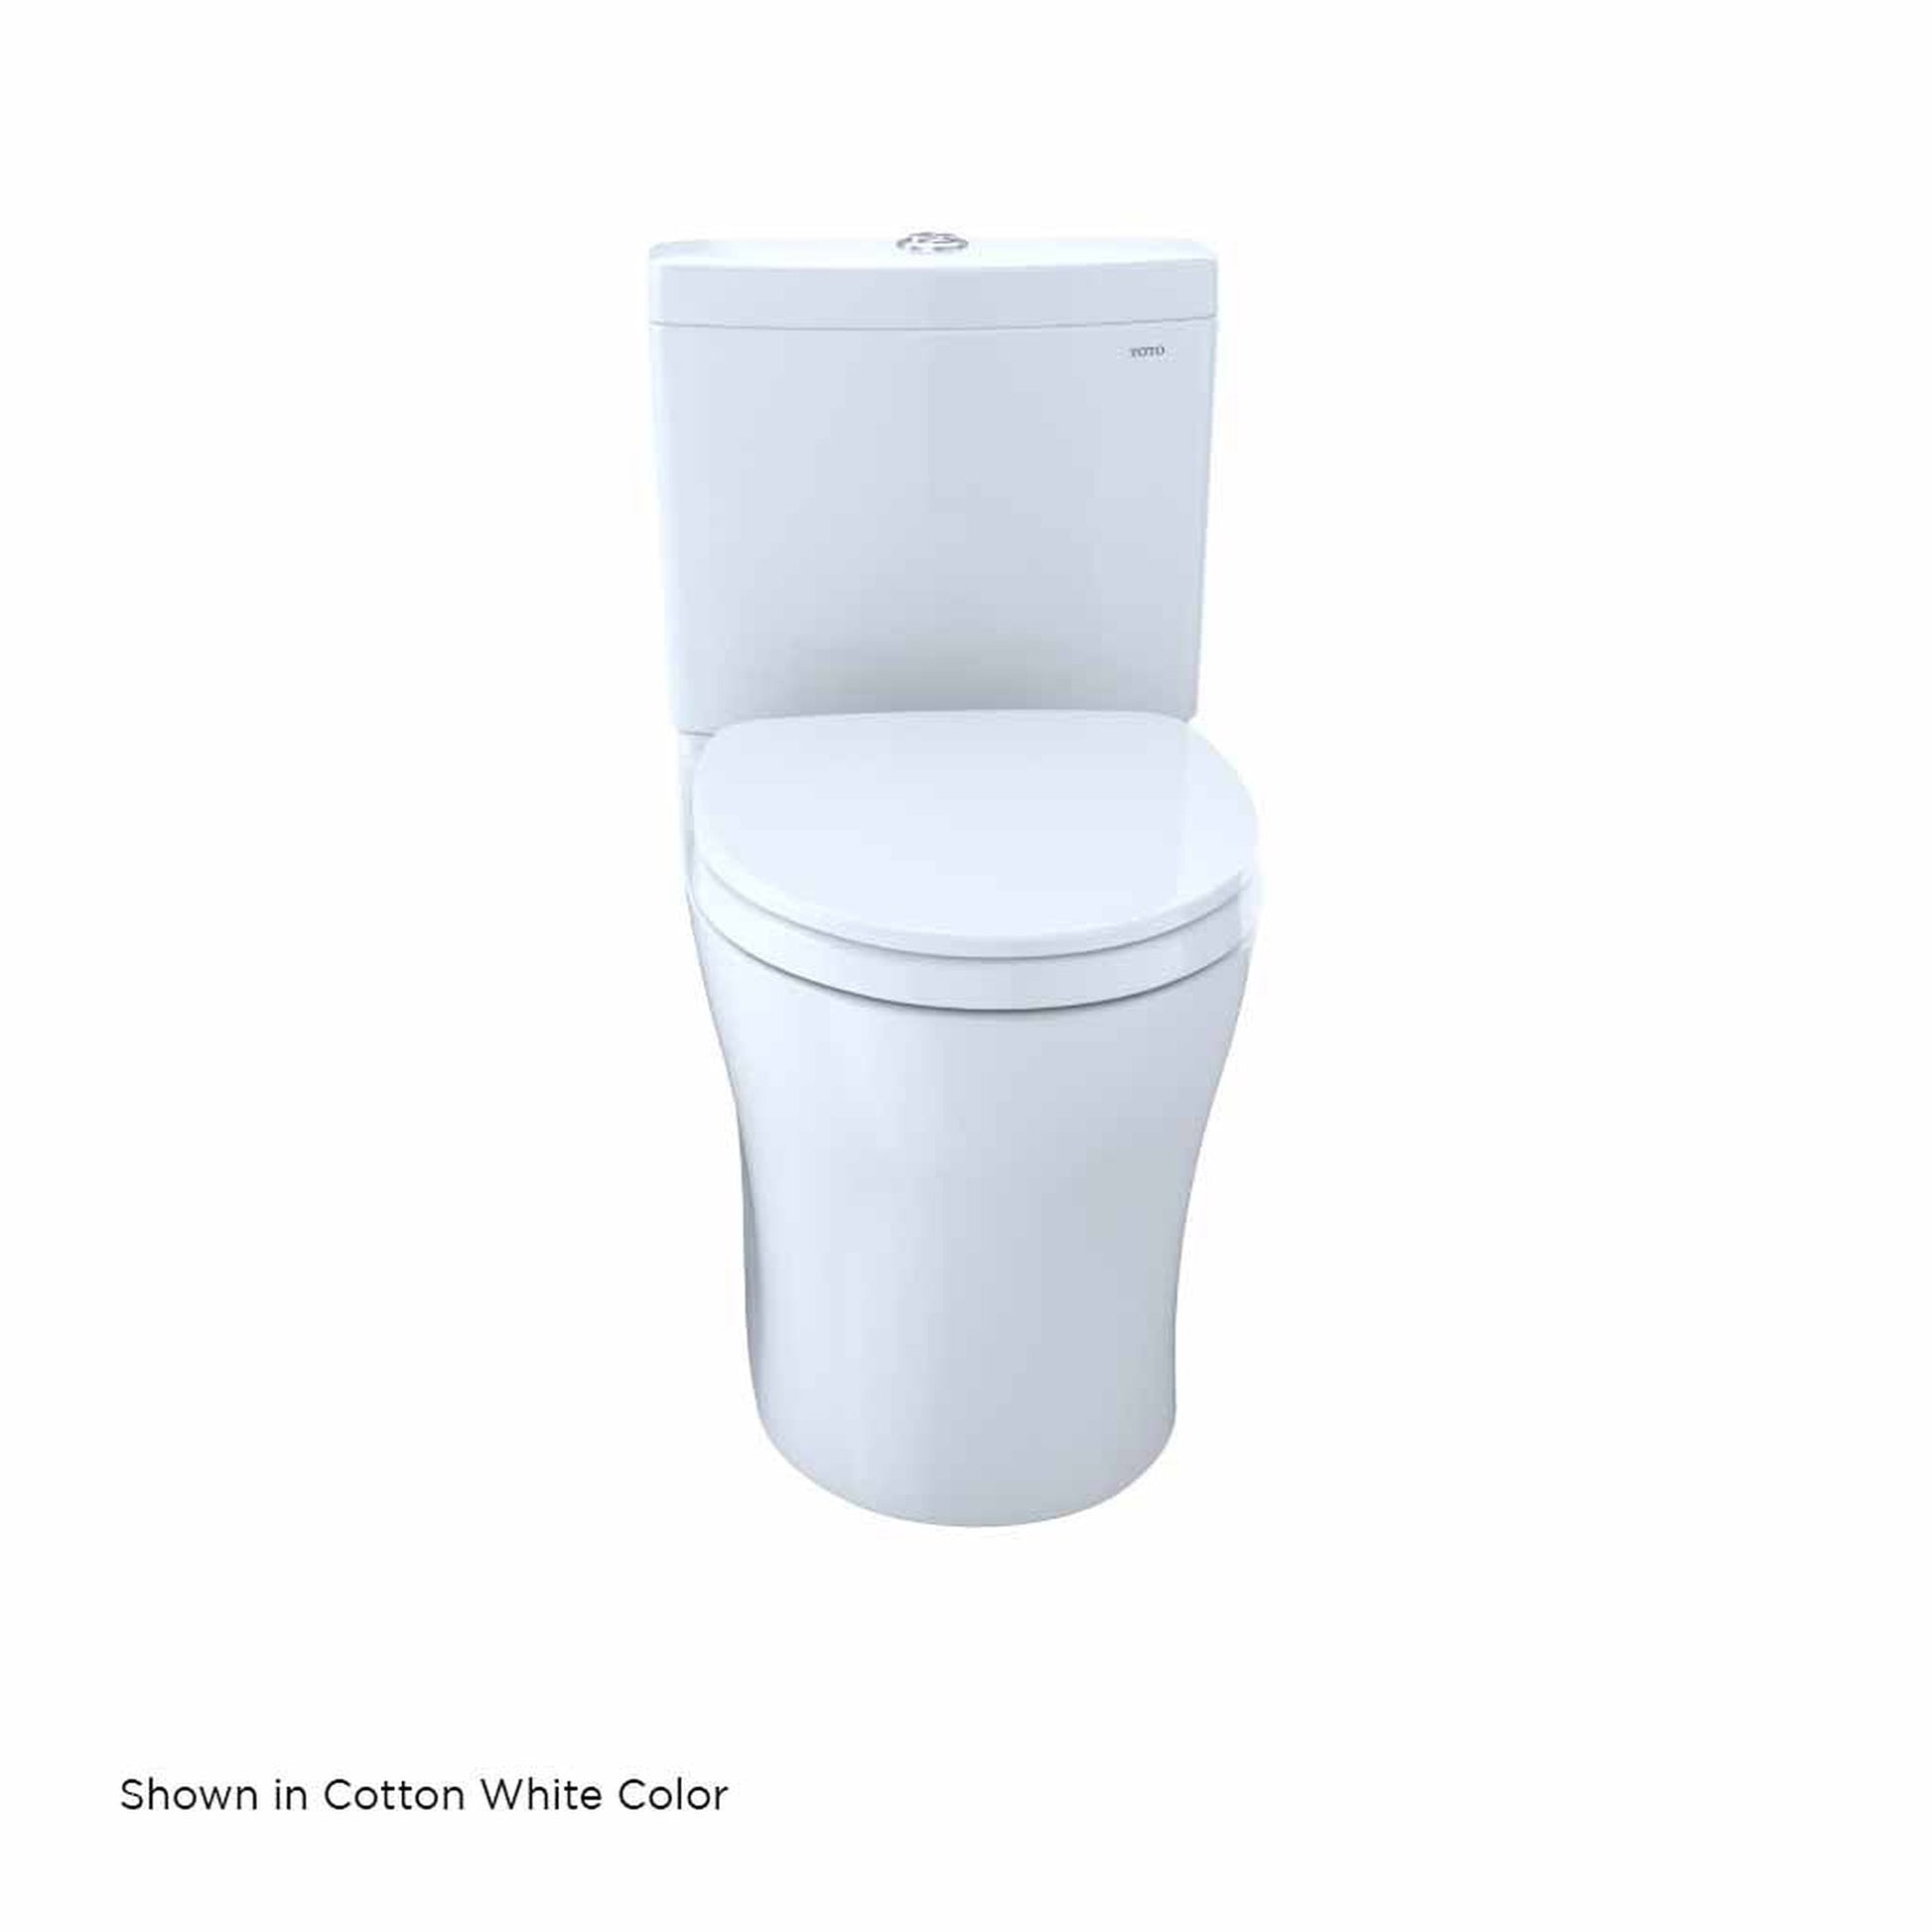 TOTO Aquia IV Cotton White 1.0 GPF & 0.8 GPF Dual-Flush Two-Piece Elongated Toilet With WASHLET+ Connection - SoftClose Seat Included